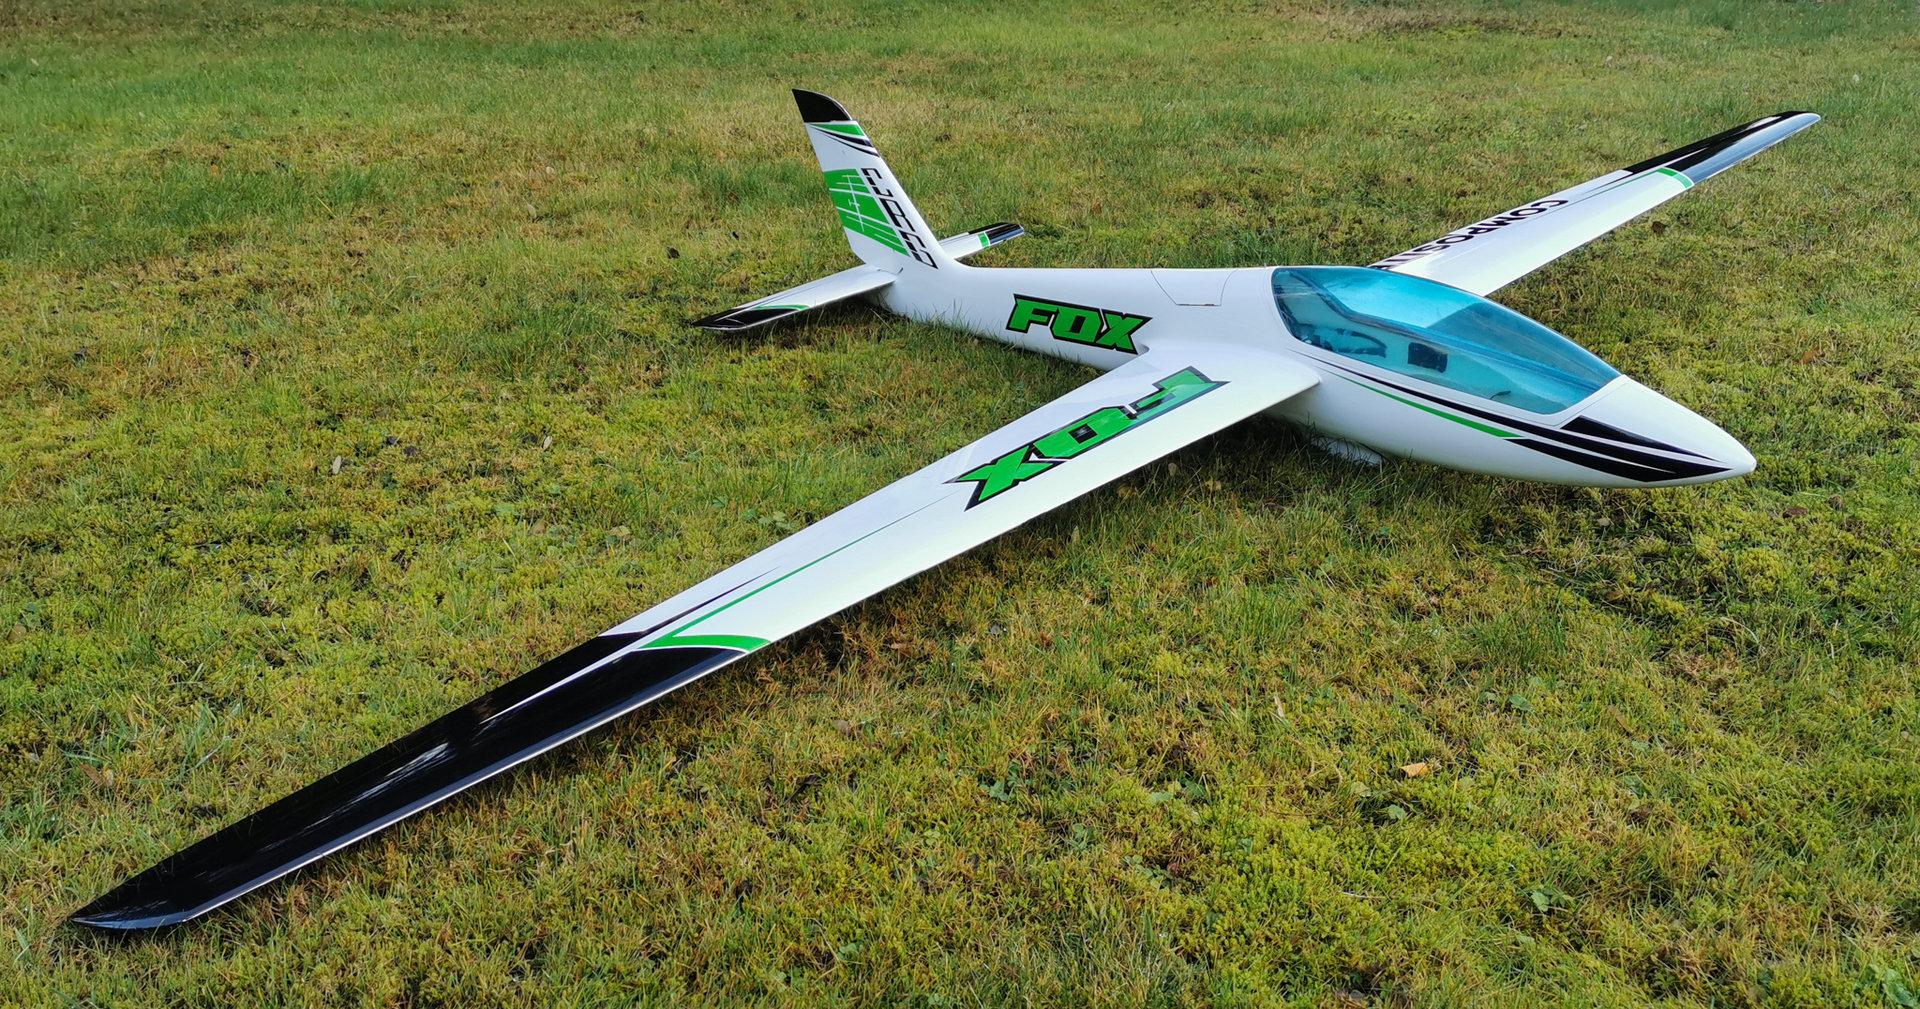 Fox Rc Glider:  Fox RC Glider: Upgrades and Accessories for Enhanced Flying Experience